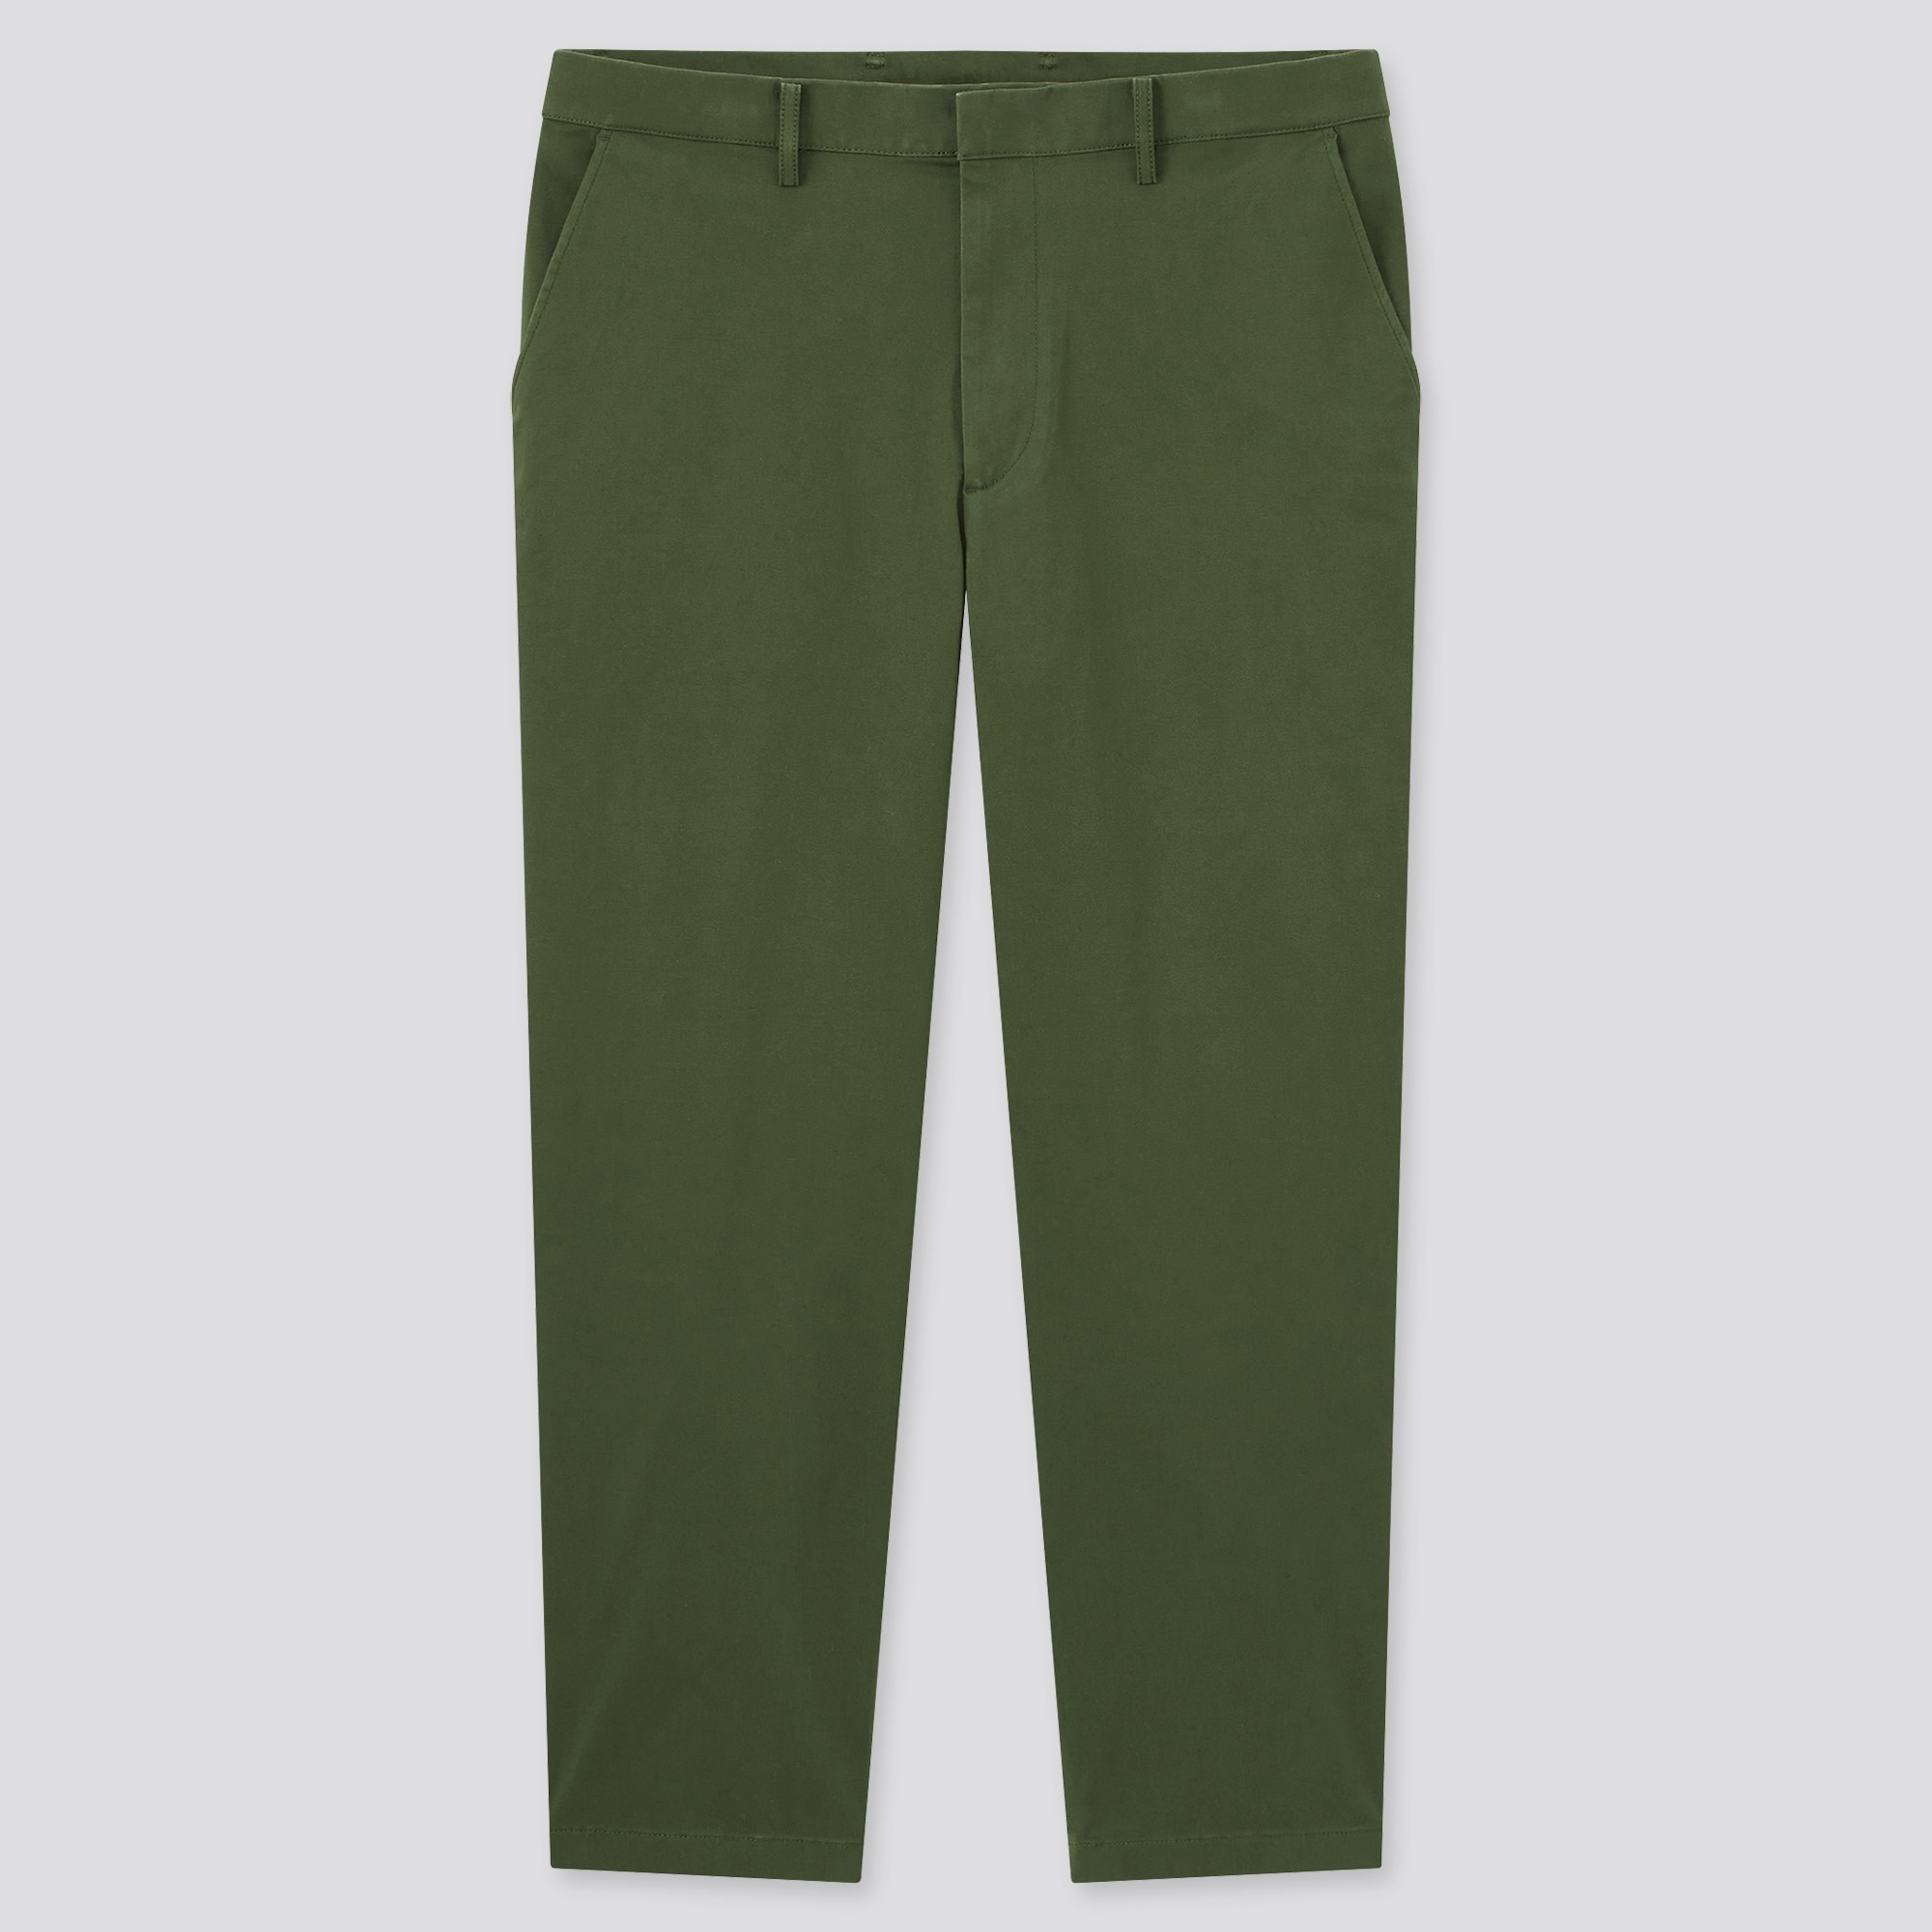 HEATTECH - Warm-lined pants  HEATTECH Warm-lined pants are a